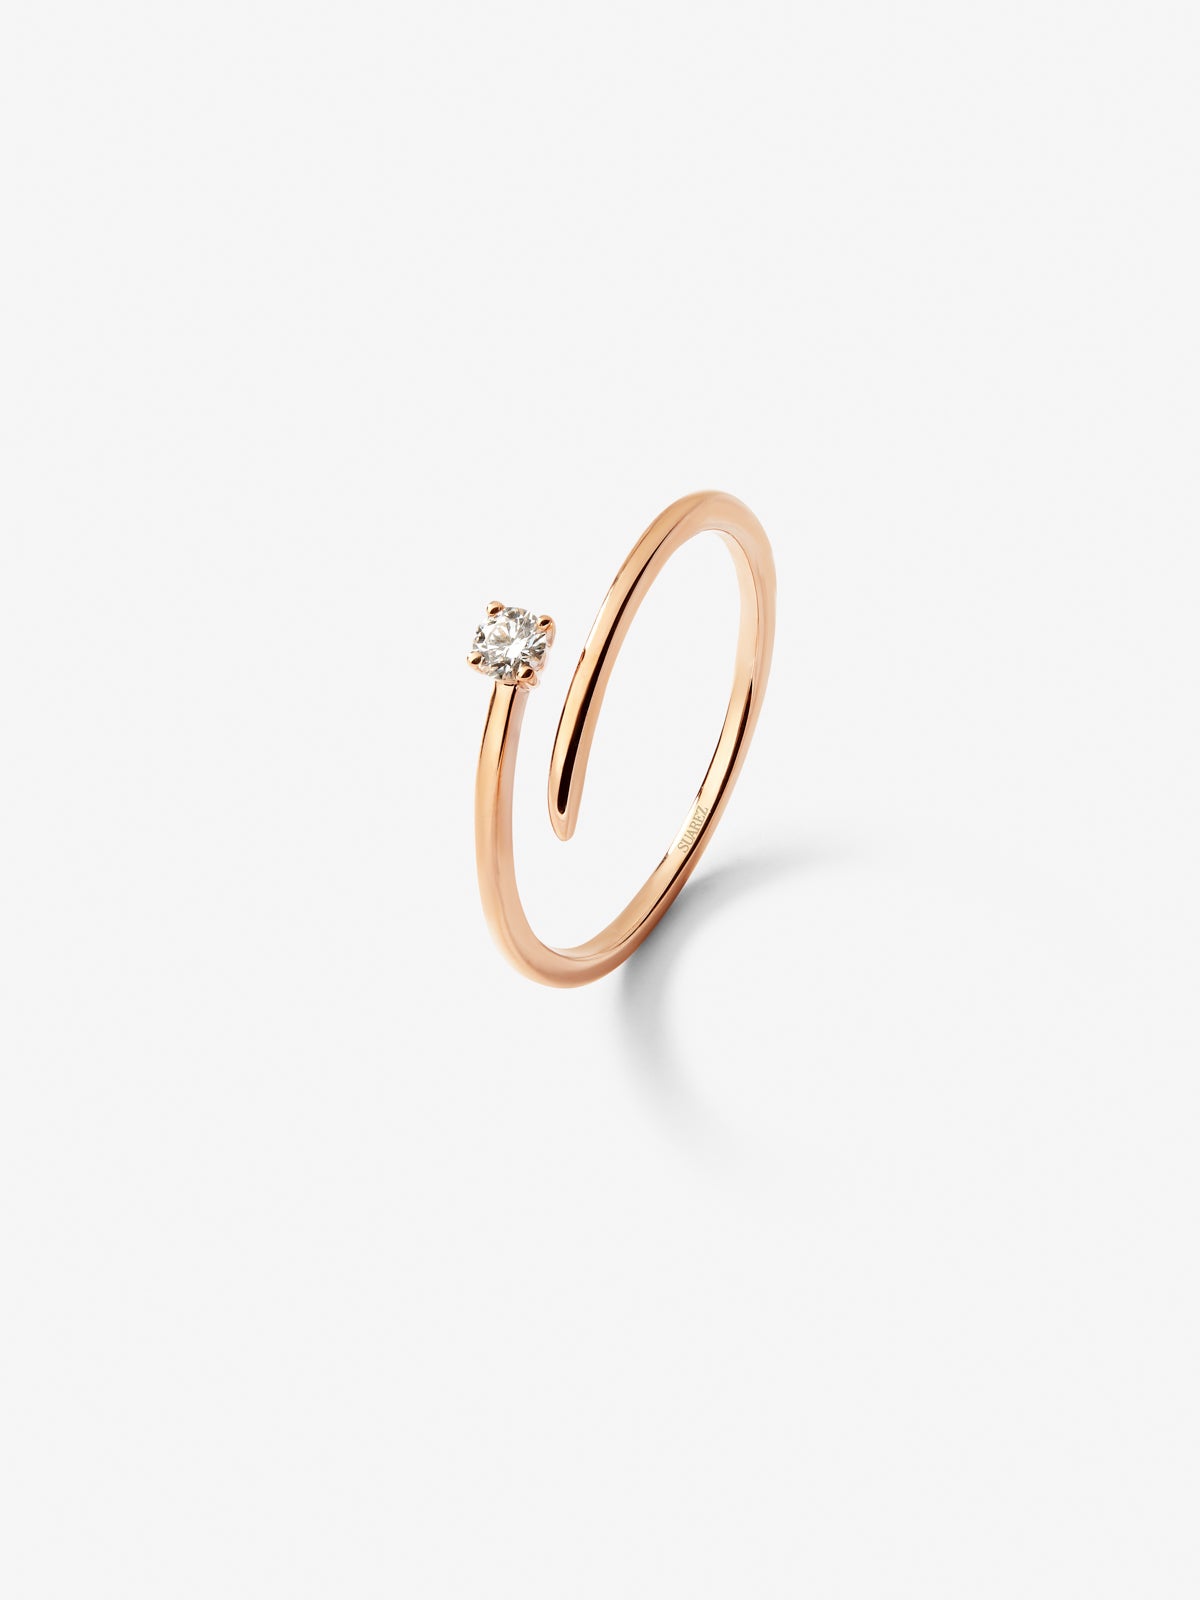 You and I 18k rose gold ring with white diamond in bright size